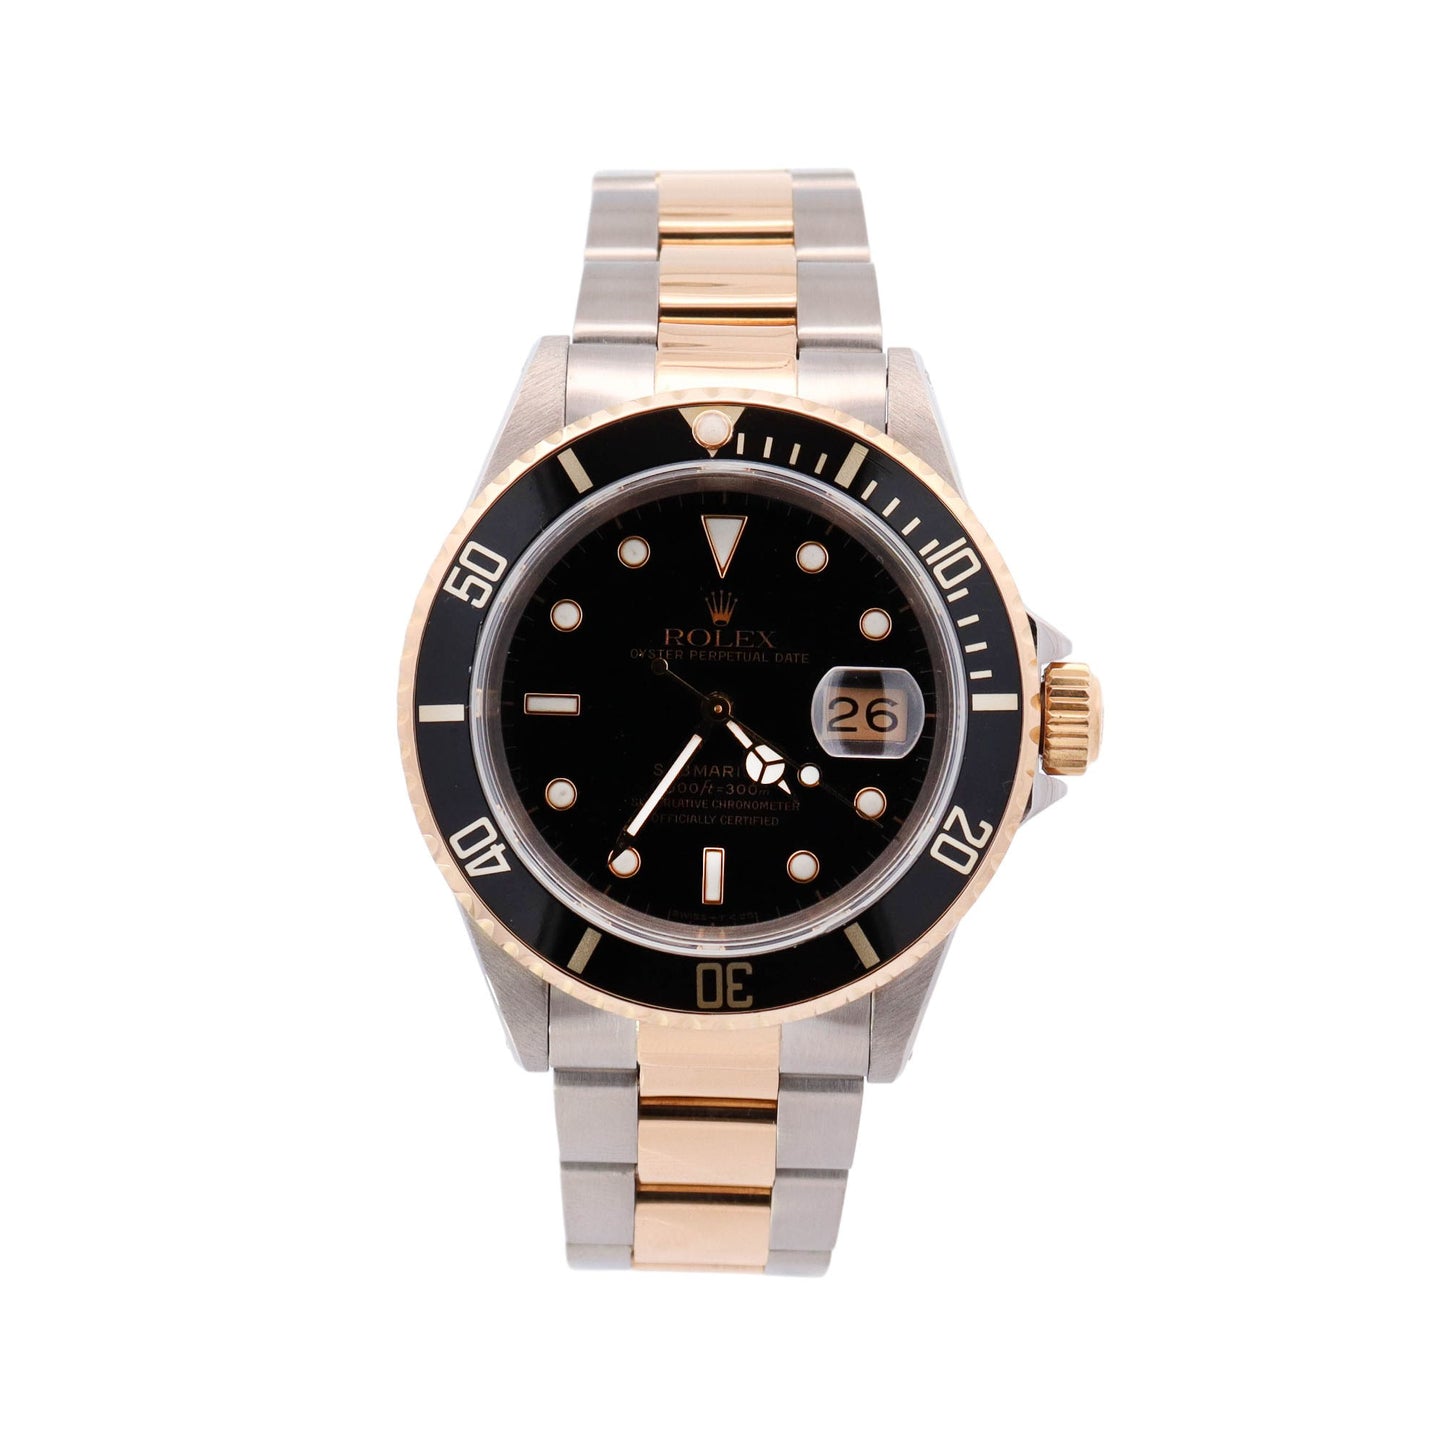 Rolex Submariner Two Tone Yellow Gold & Stainless Steel 40mm Black Dot Dial Watch Reference #: 16613LN